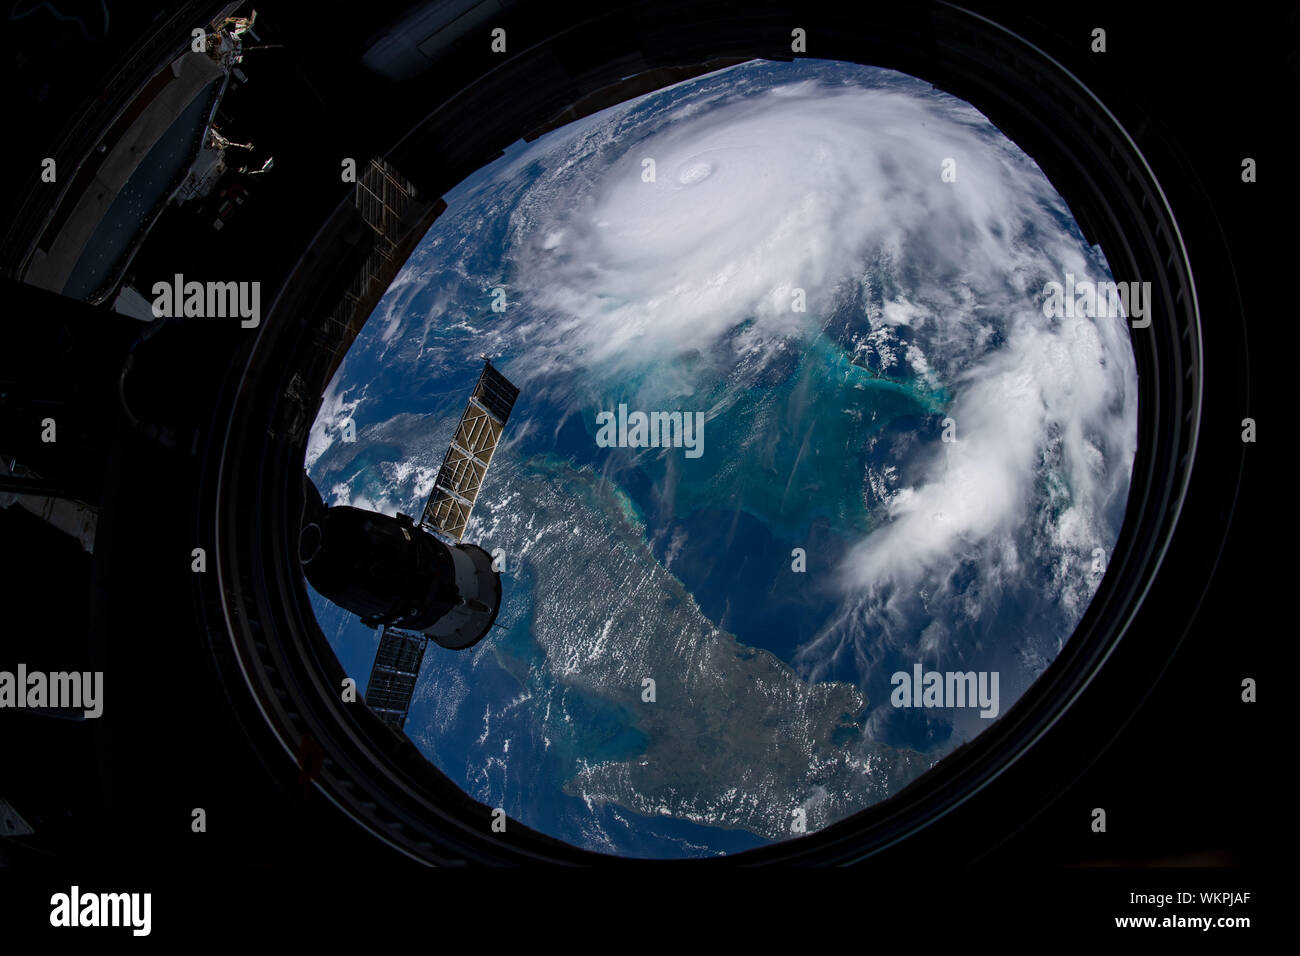 International Space Station. 02 September, 2019. Cyclonic clouds of Hurricane Dorian seen from a porthole in the International Space Station as it moves toward the coast of Florida September 2, 2019 in the Atlantic Ocean. The current forecast calls for Dorian to strengthen over open water to a Category 4 with winds of 140 mph before making landfall in South Florida late Monday.  Credit: NASA/Planetpix/Alamy Live News Stock Photo